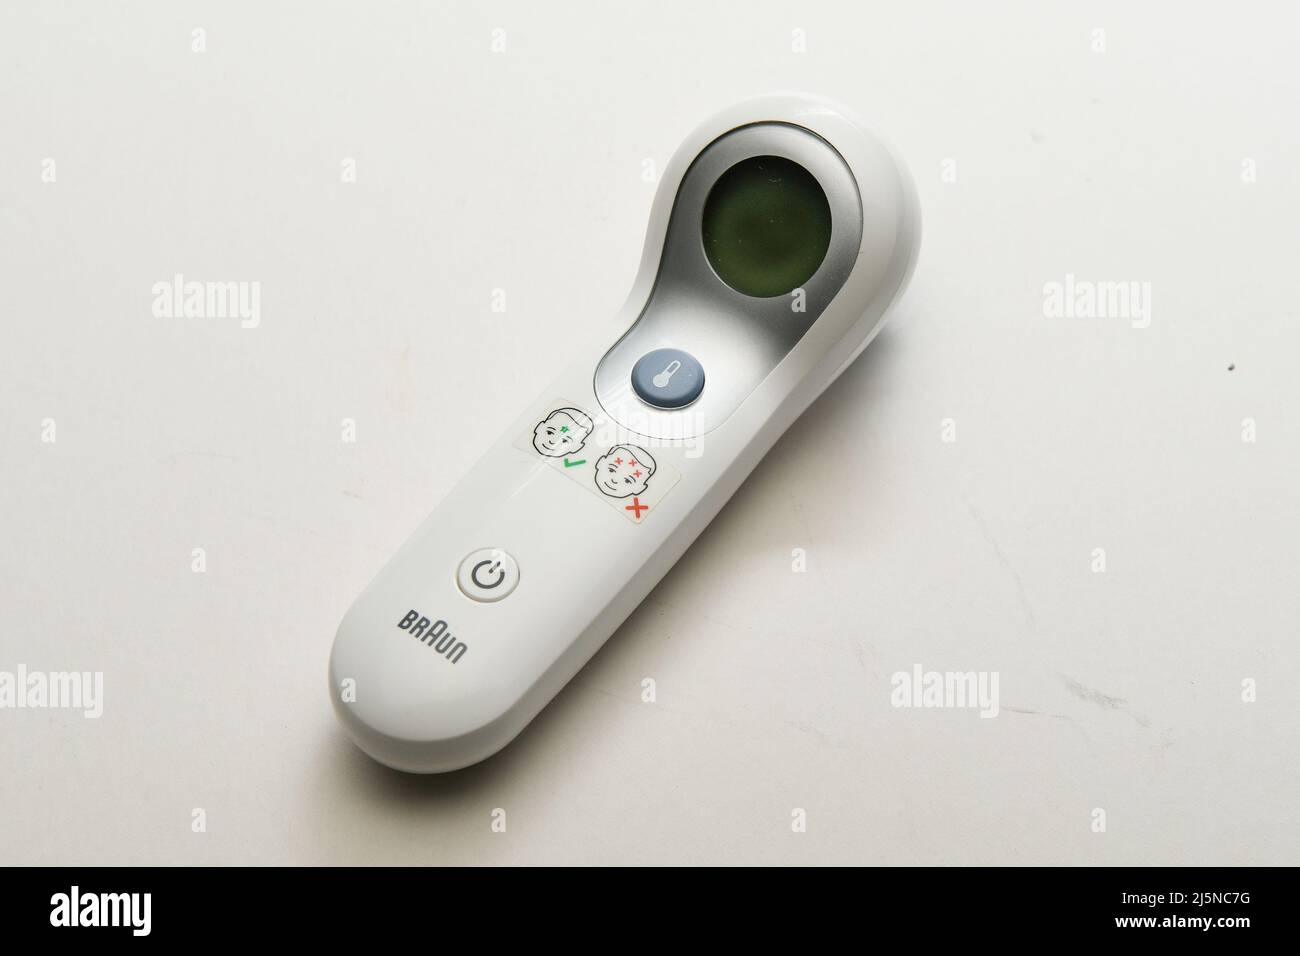 Cut out Touchless non-contact digital thermometer commonly used to measure human body temperature for fever. Stock Photo